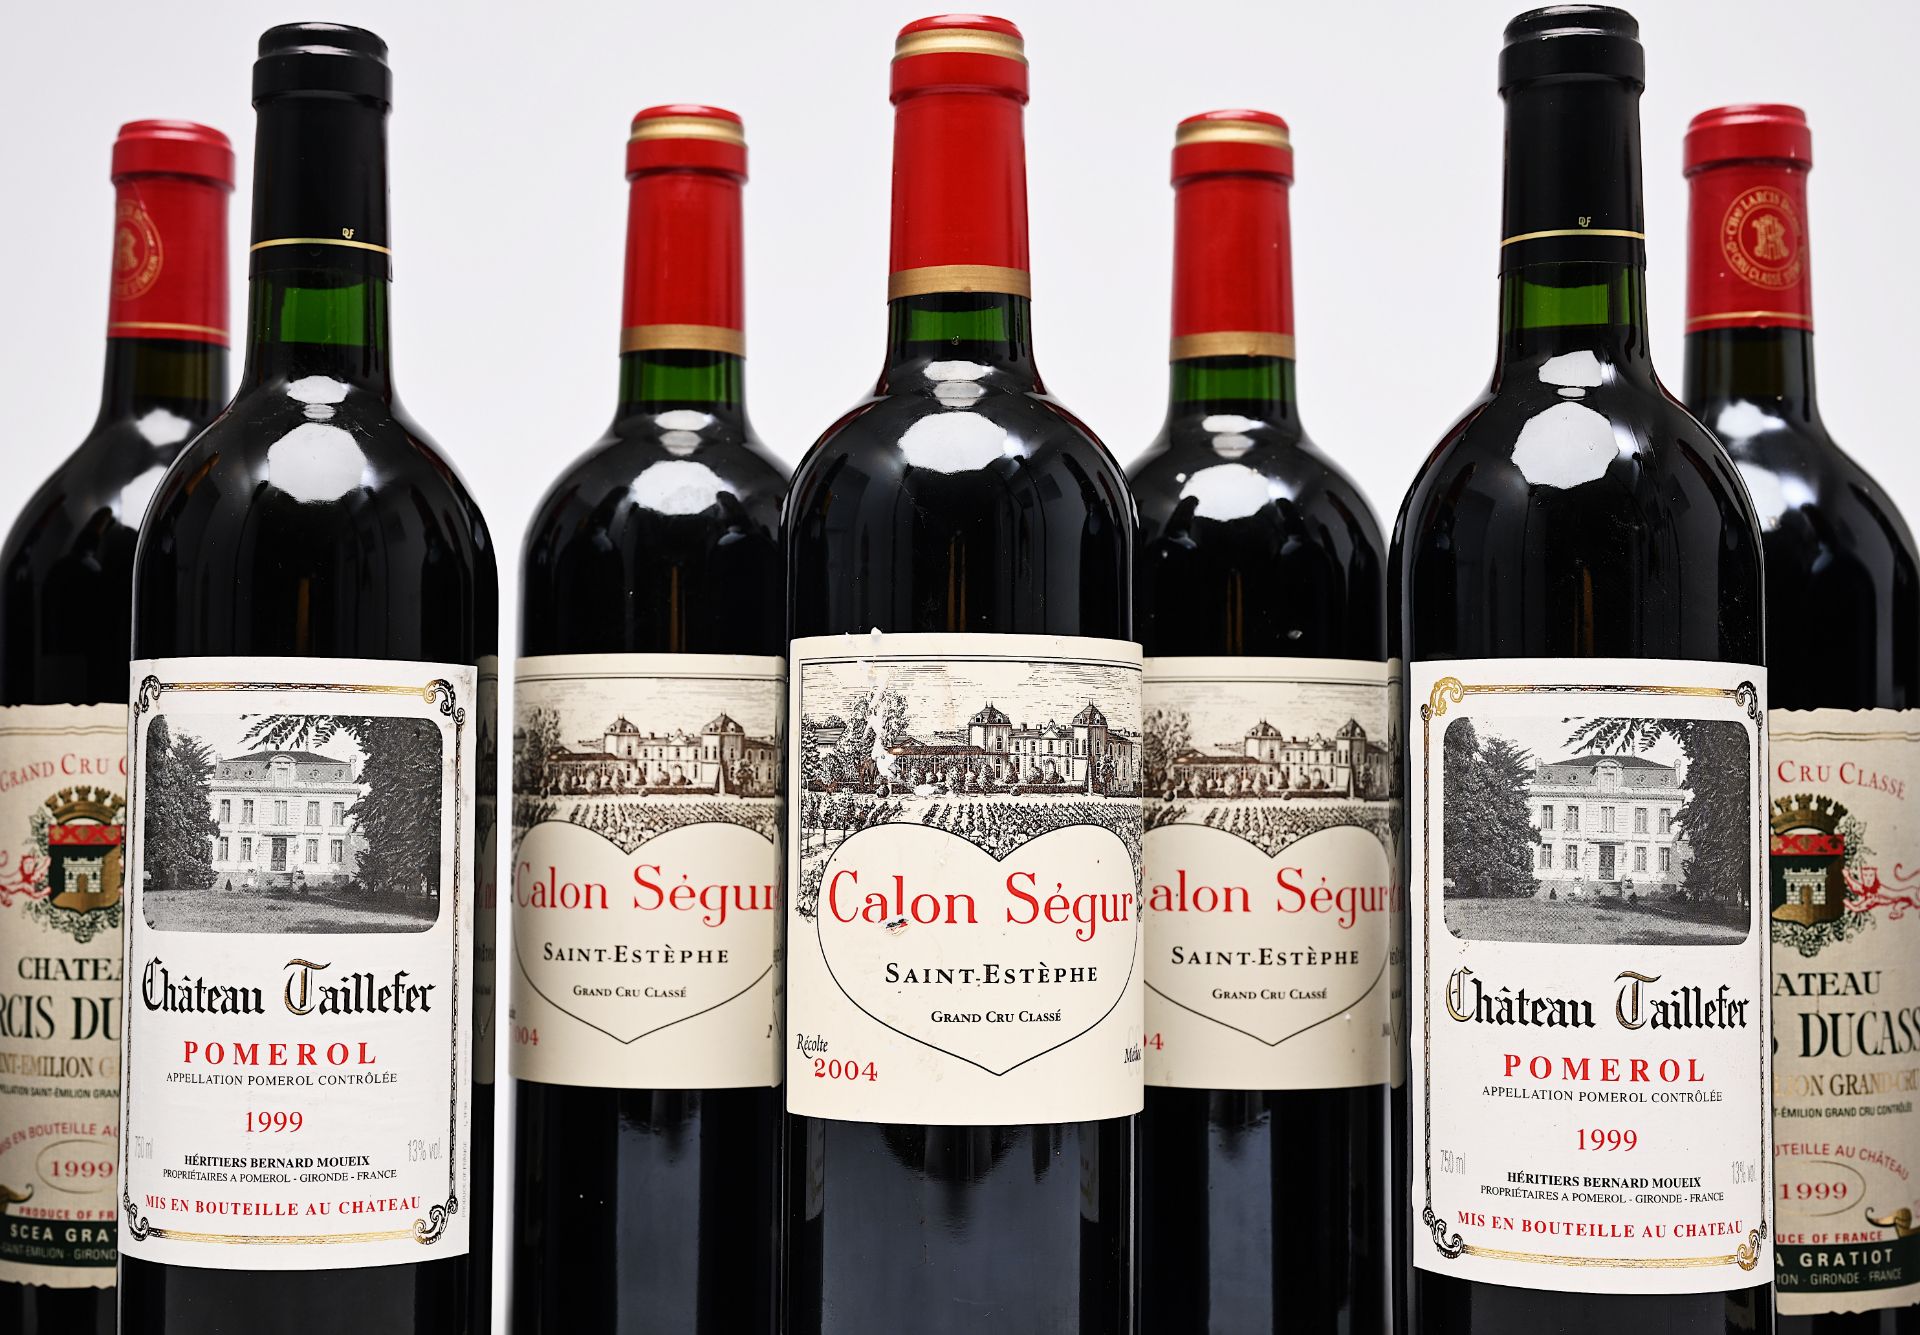 Three bottles of Chateau Taillefer Pomerol, four bottles of Chateau Larcis Ducasse Saint-Emilion and - Image 2 of 3